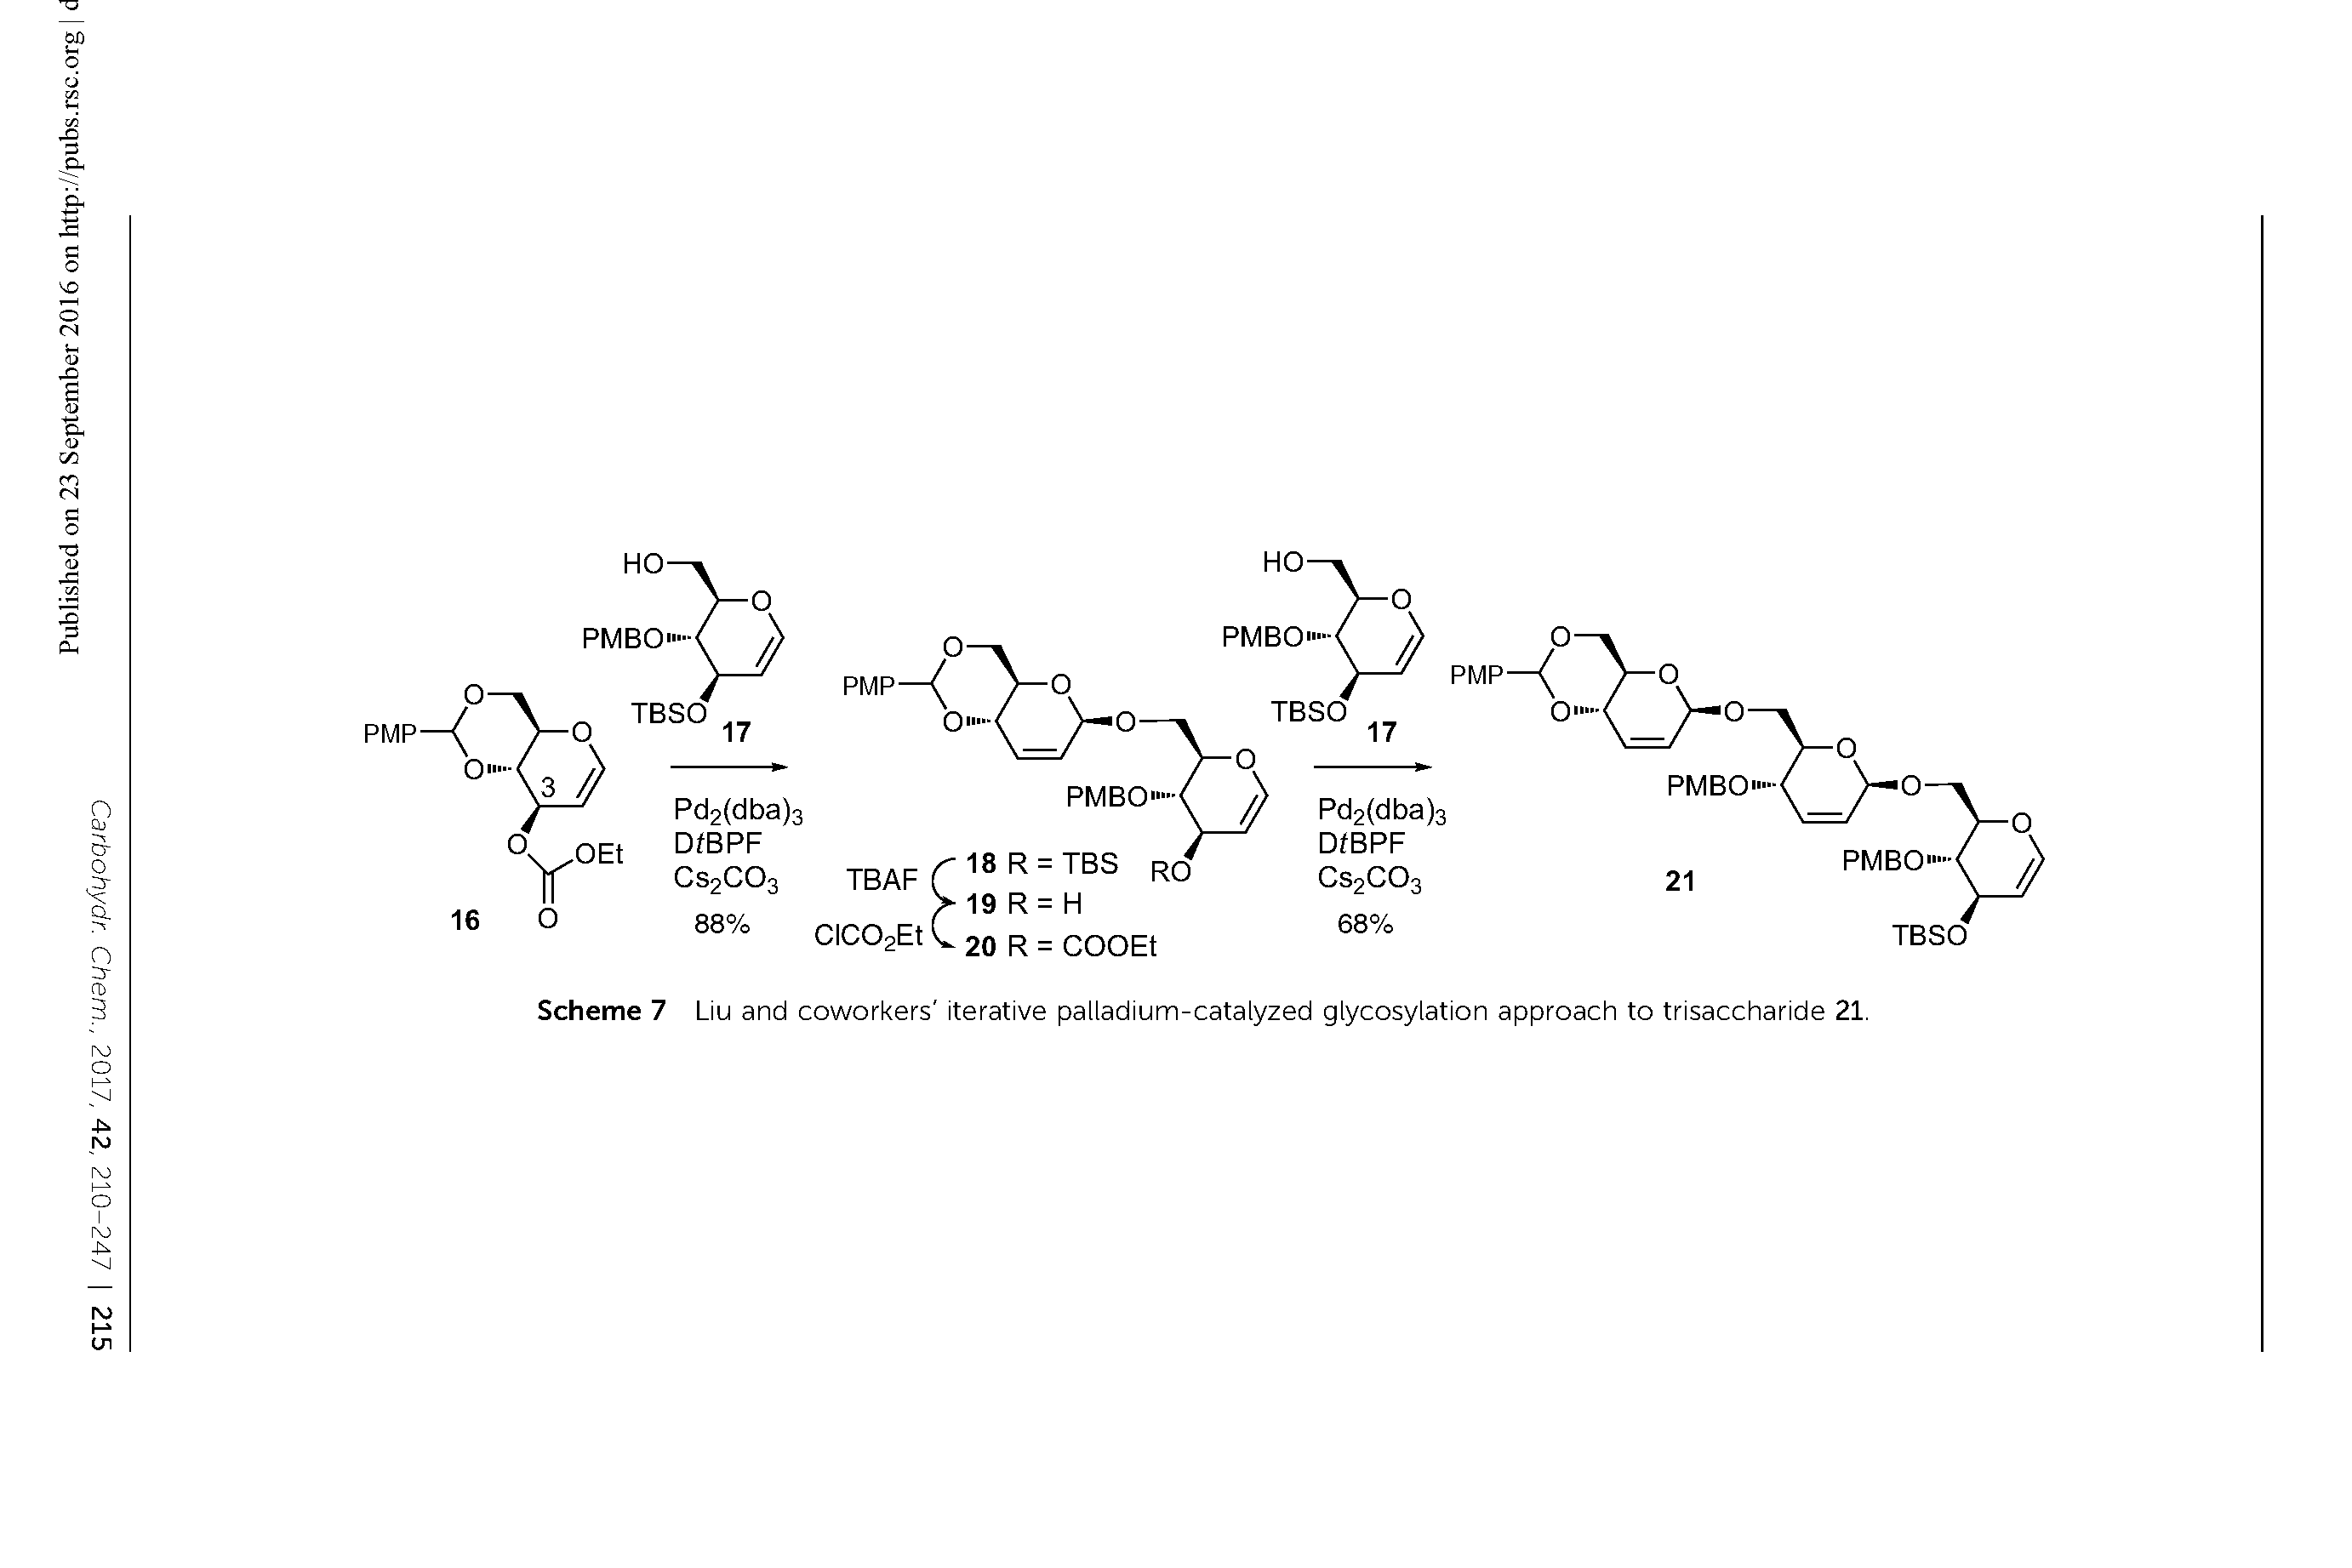 Scheme 7 Liu and coworkers iterative palladium-catalyzed glycosylation approach to trisaccharide 21.